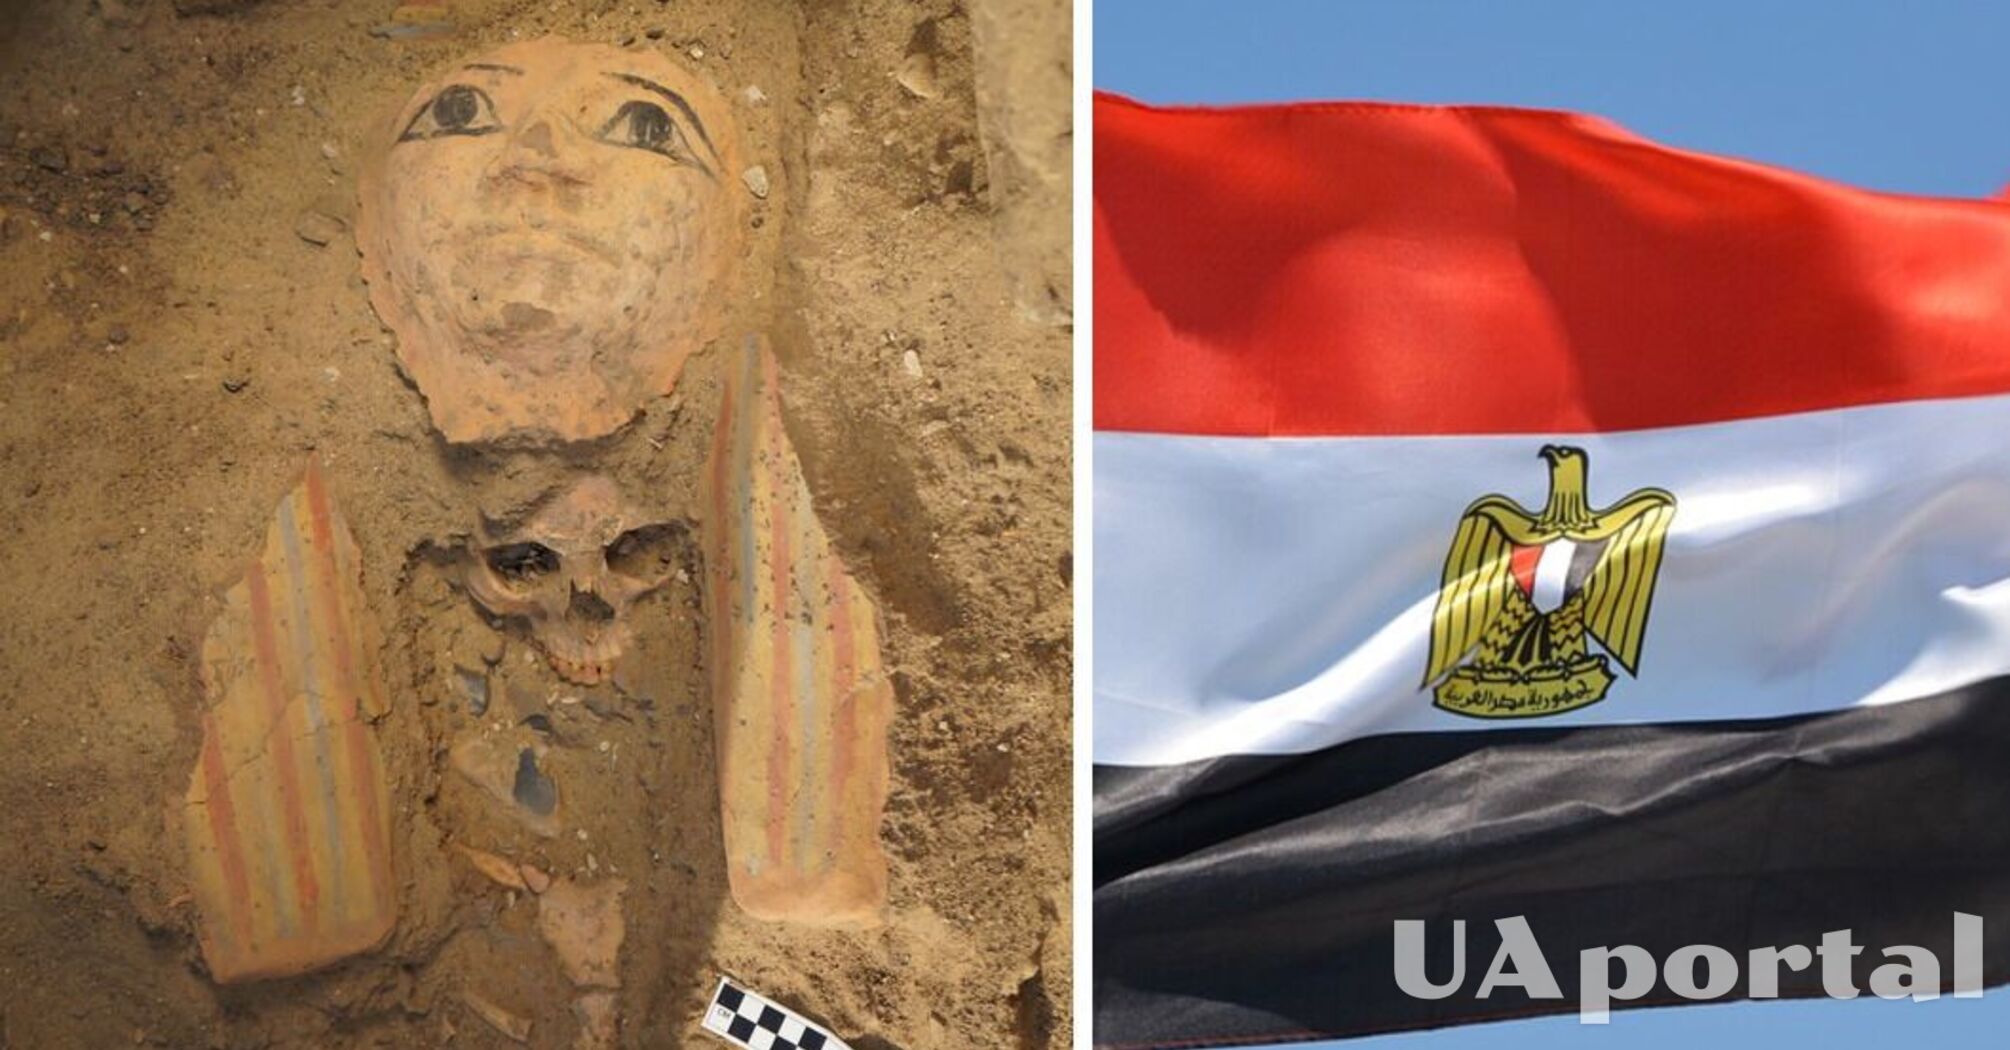 Ancient intact tomb carved in rock discovered in Egypt (photo)